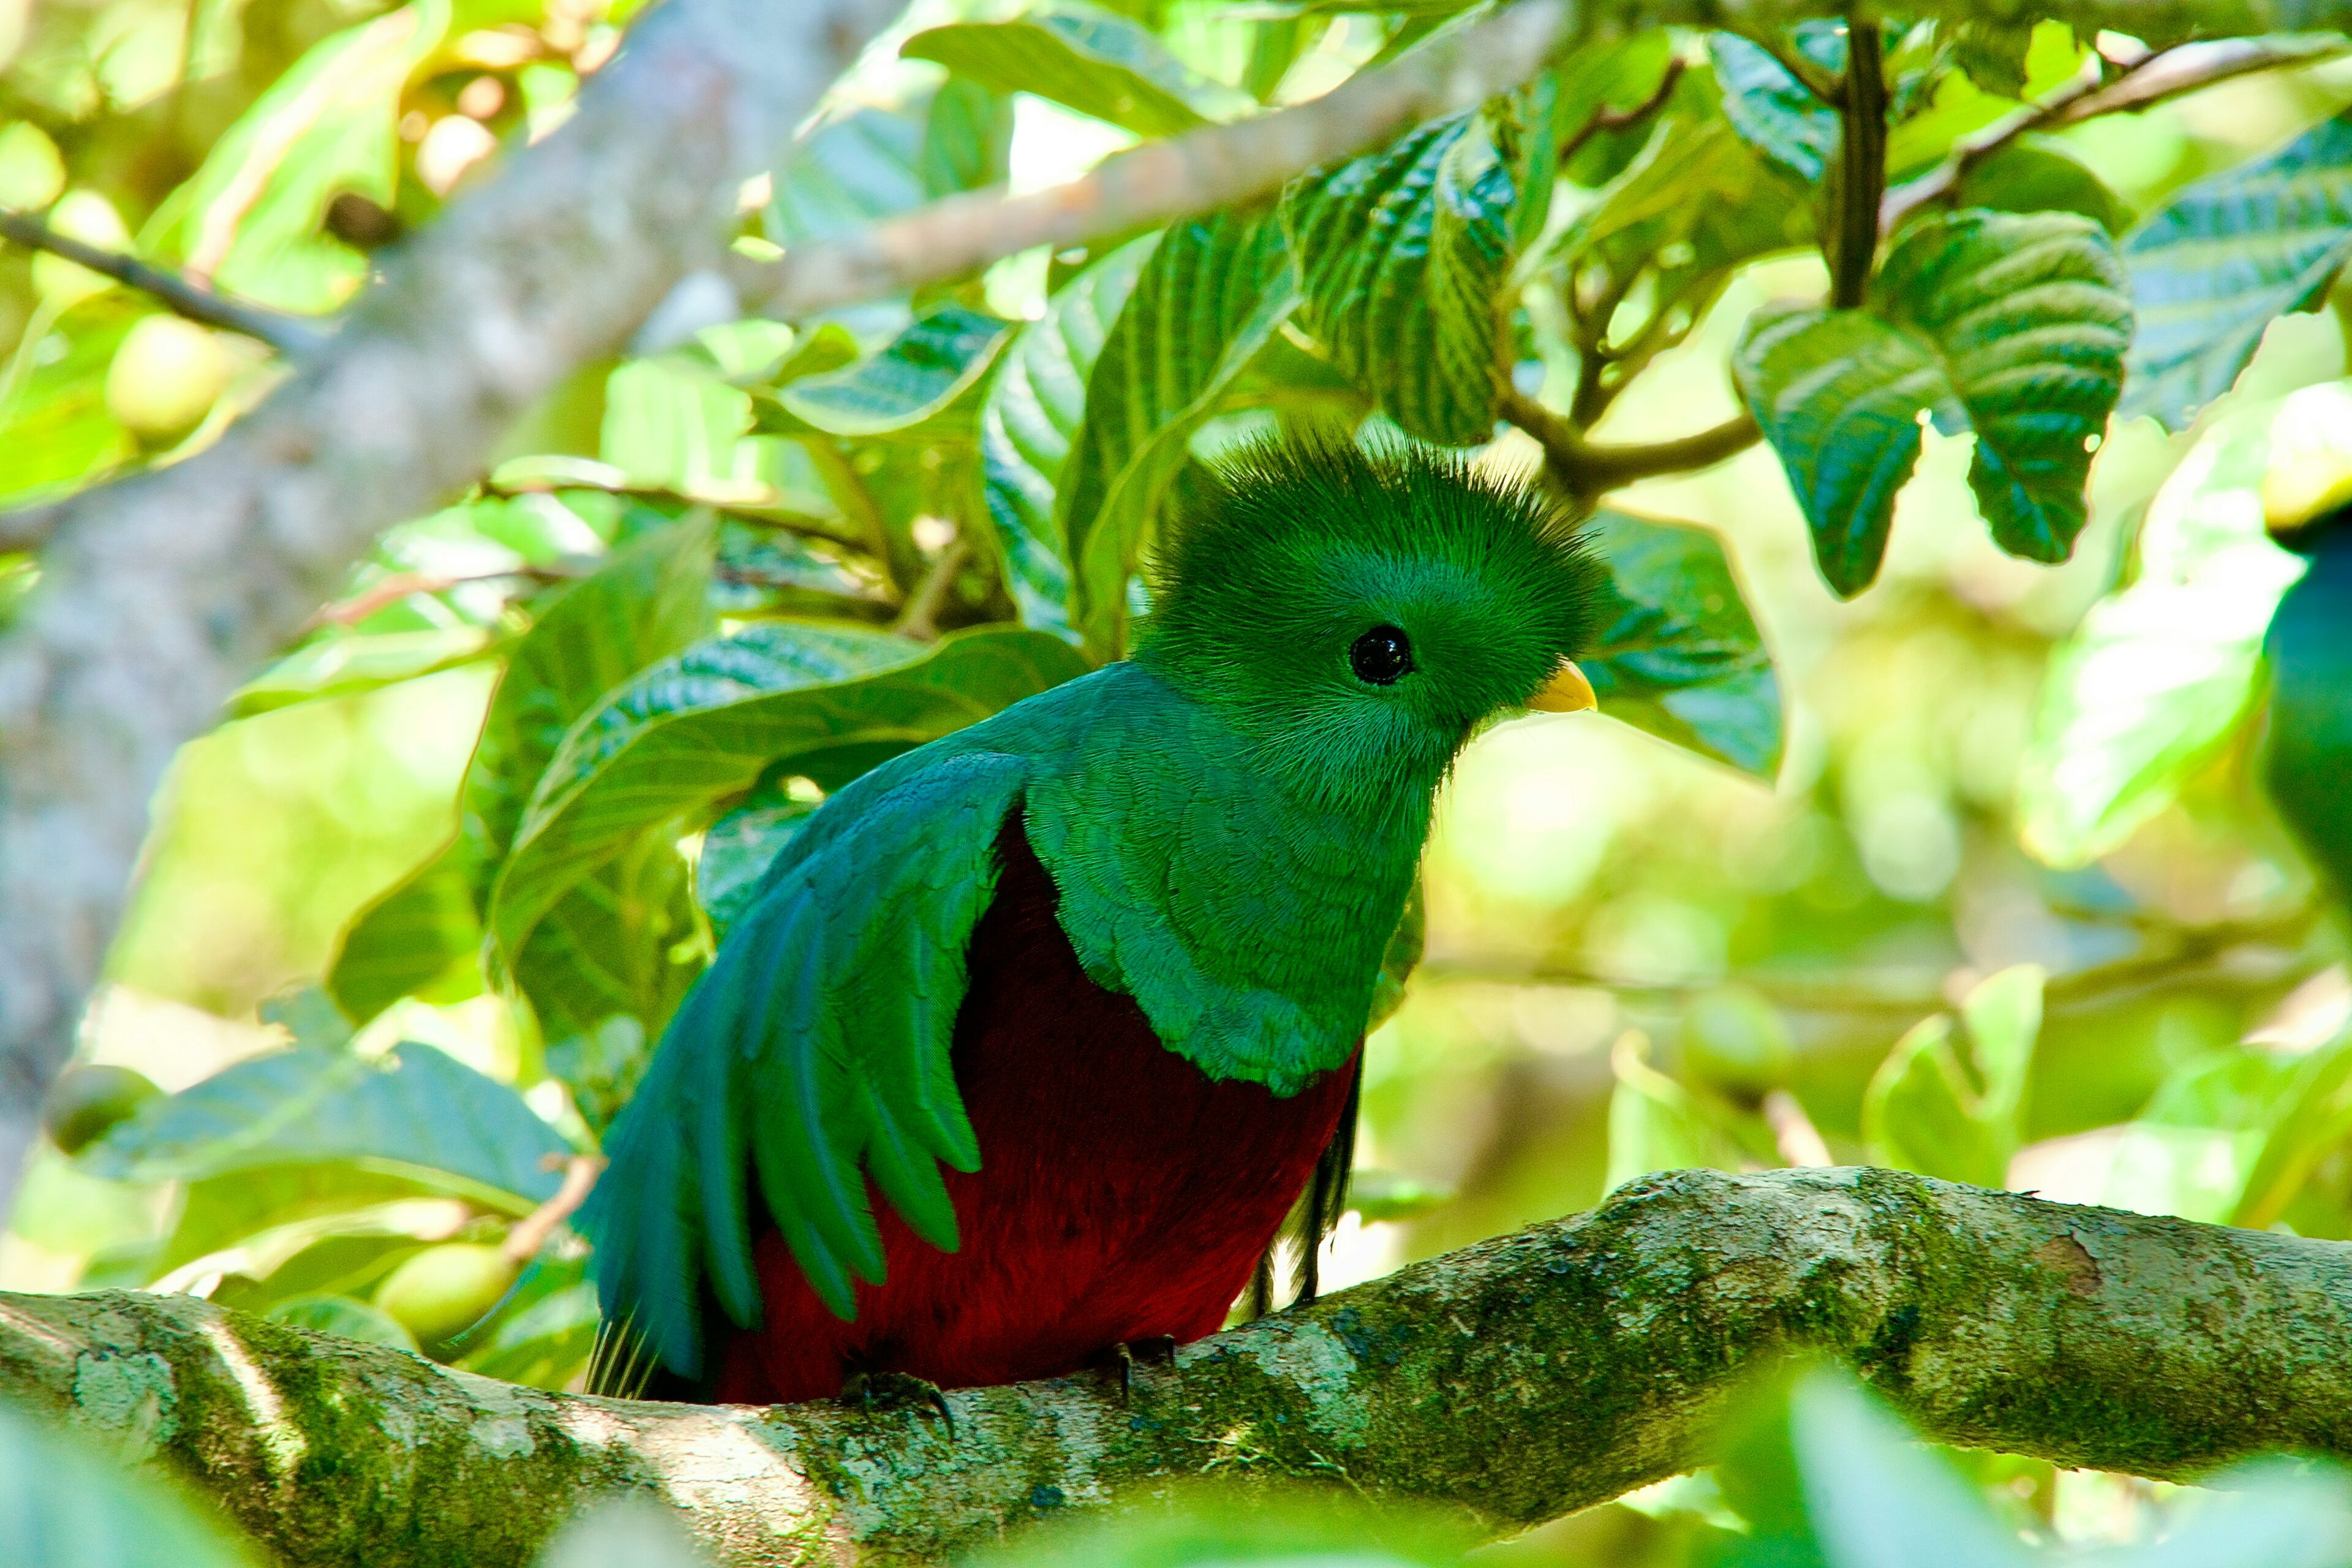 Species that you Can Get in the Tenorio Volcano National Park